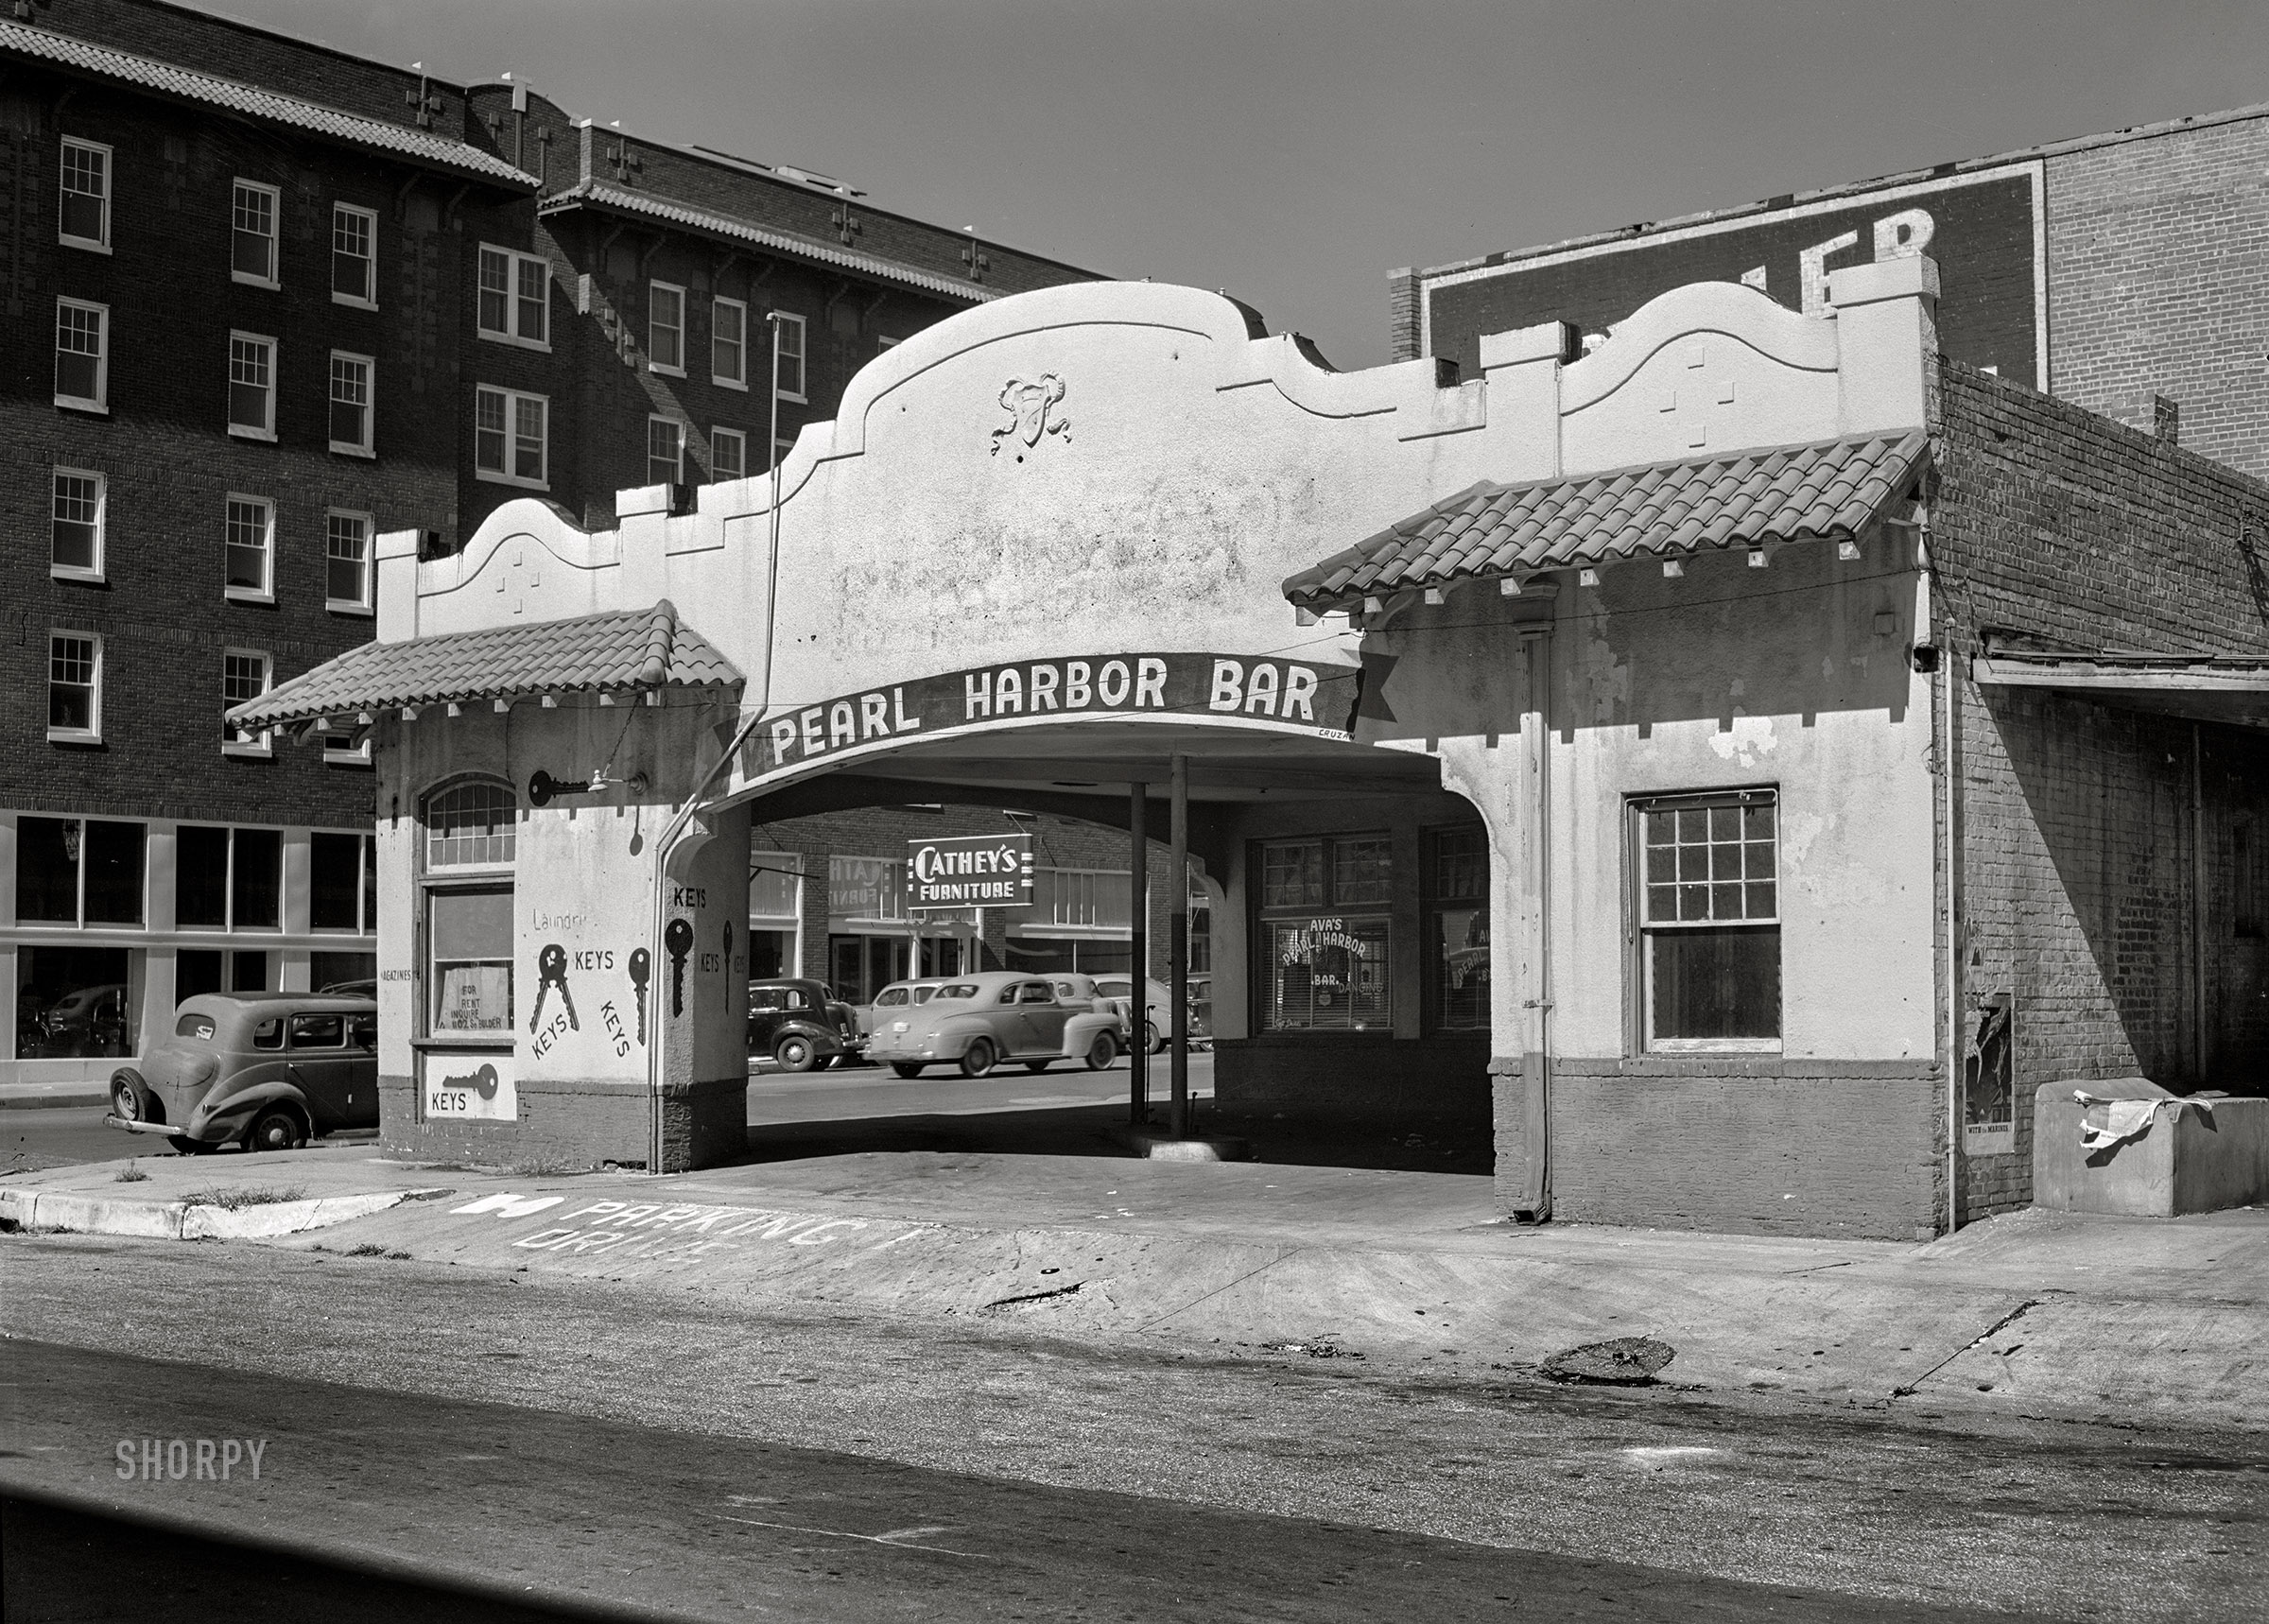 October 1942. "Tulsa, Oklahoma. Gas station converted into a bar." Libation station for the Duration. Acetate negative by John Vachon for the Office of War Information. View full size.